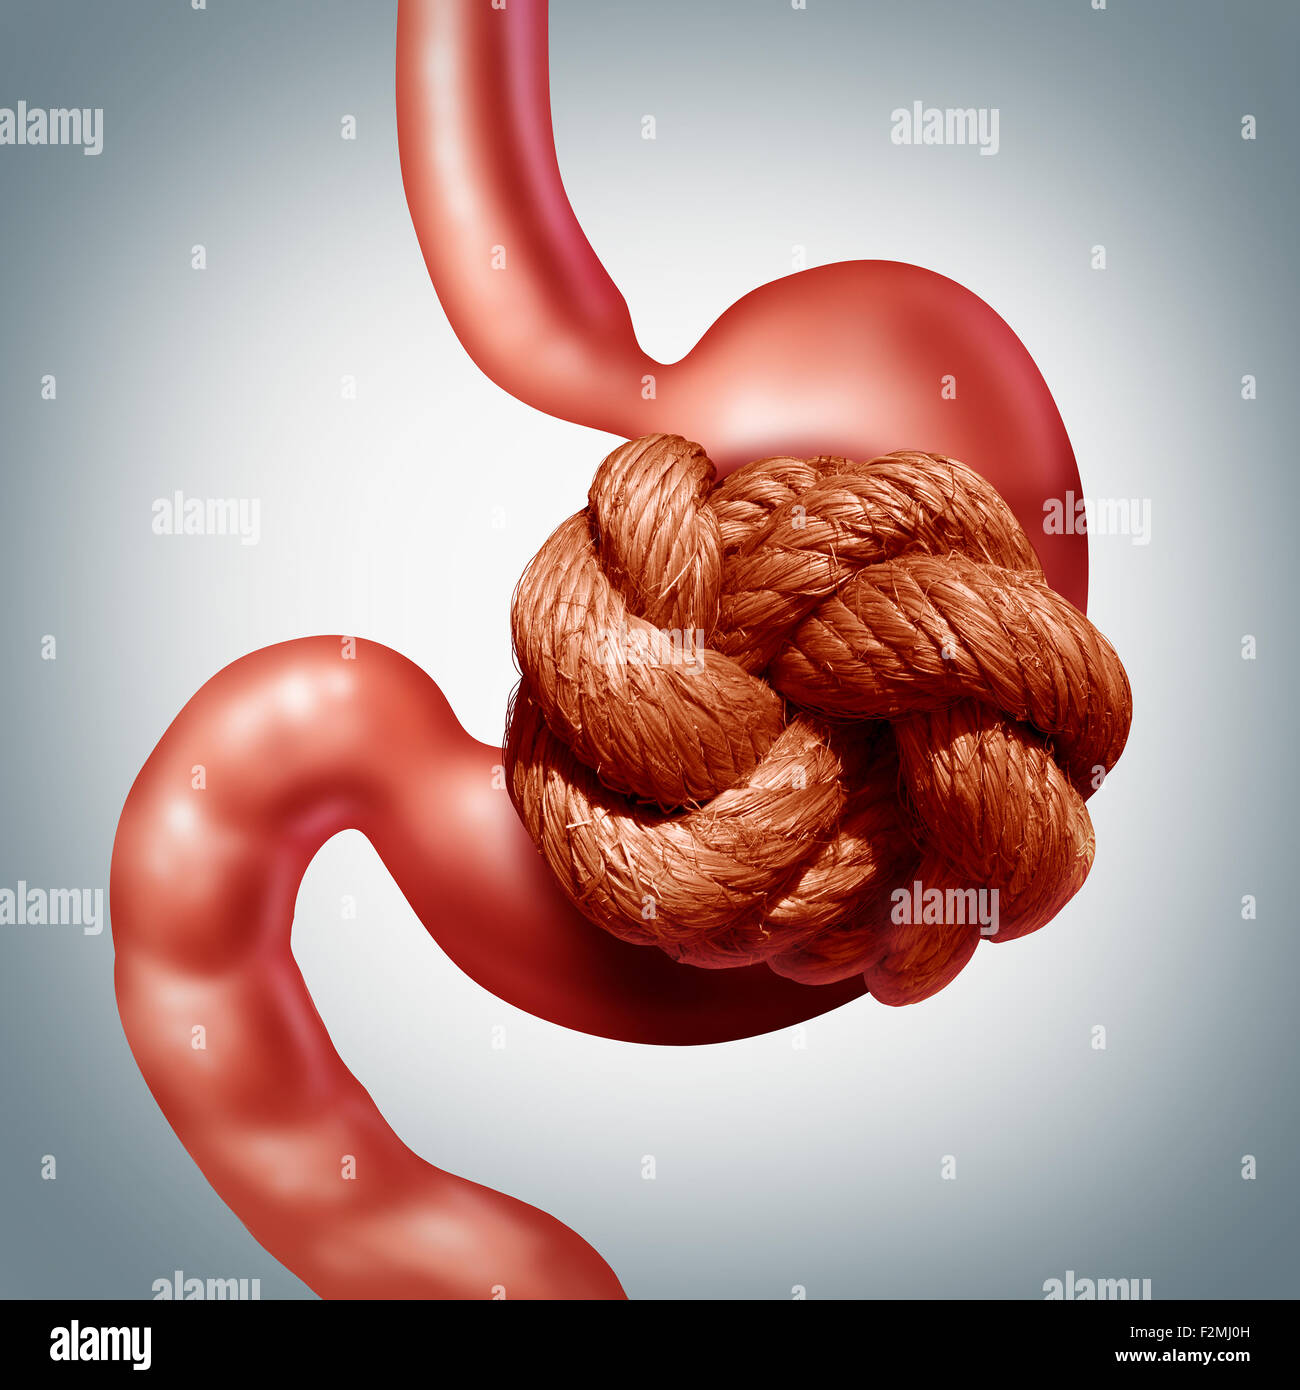 Nervous stomach problem and pain or stomachache and ulcer discomfort concept as a human digestive organ painfully wrapped with a tight rope knot as a medical healthcare stress and anxiety symptoms symbol. Stock Photo